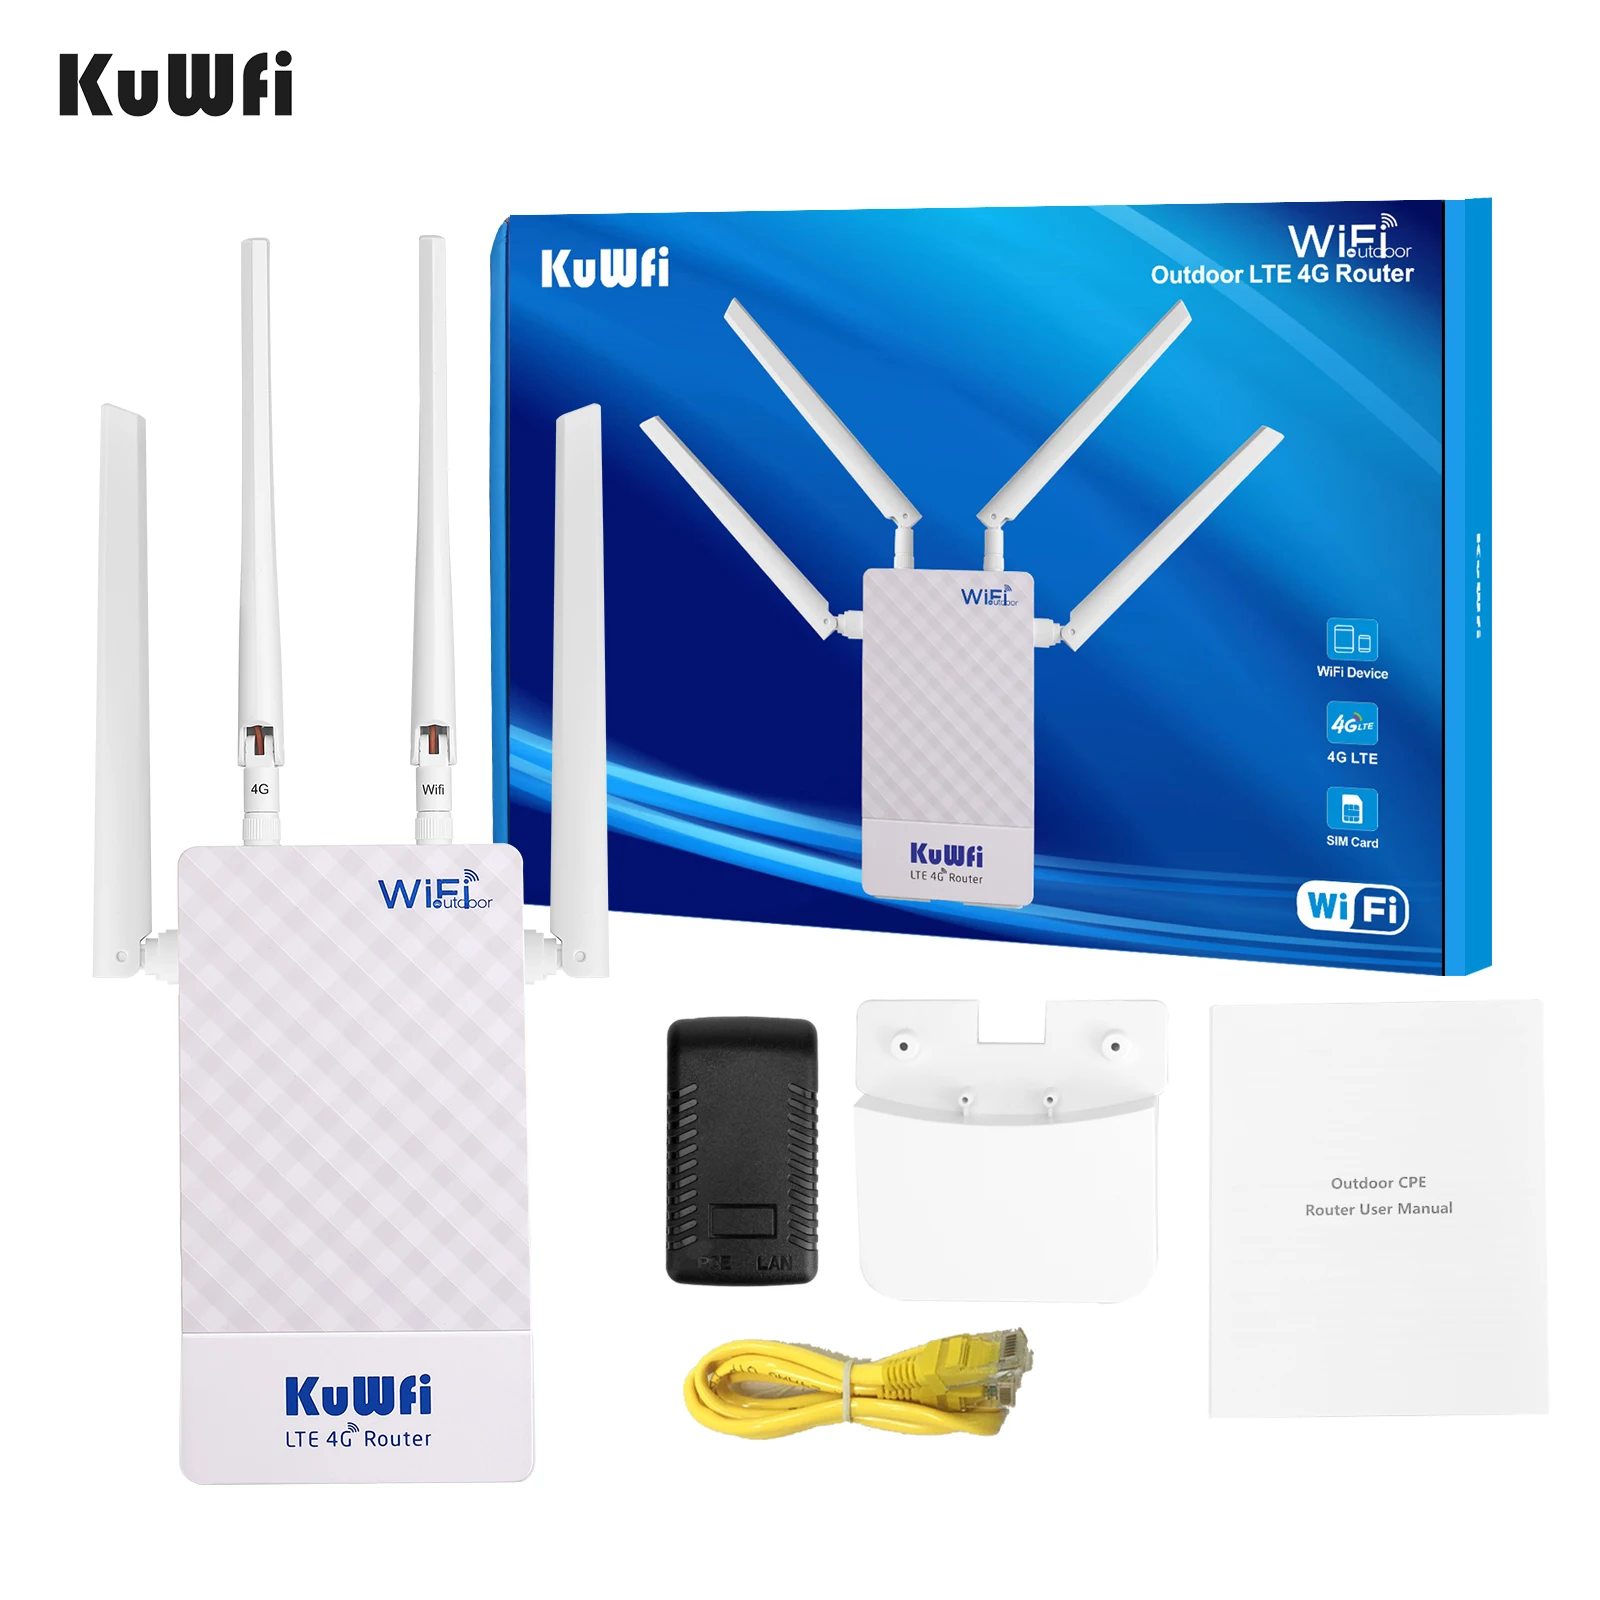 KuWFi 4G Outdoor Router 4G LTE SIM Card WiFi Router Waterproof Support Port Mapping DMZ Setting For 48V POE Switch POE Camera images - 6